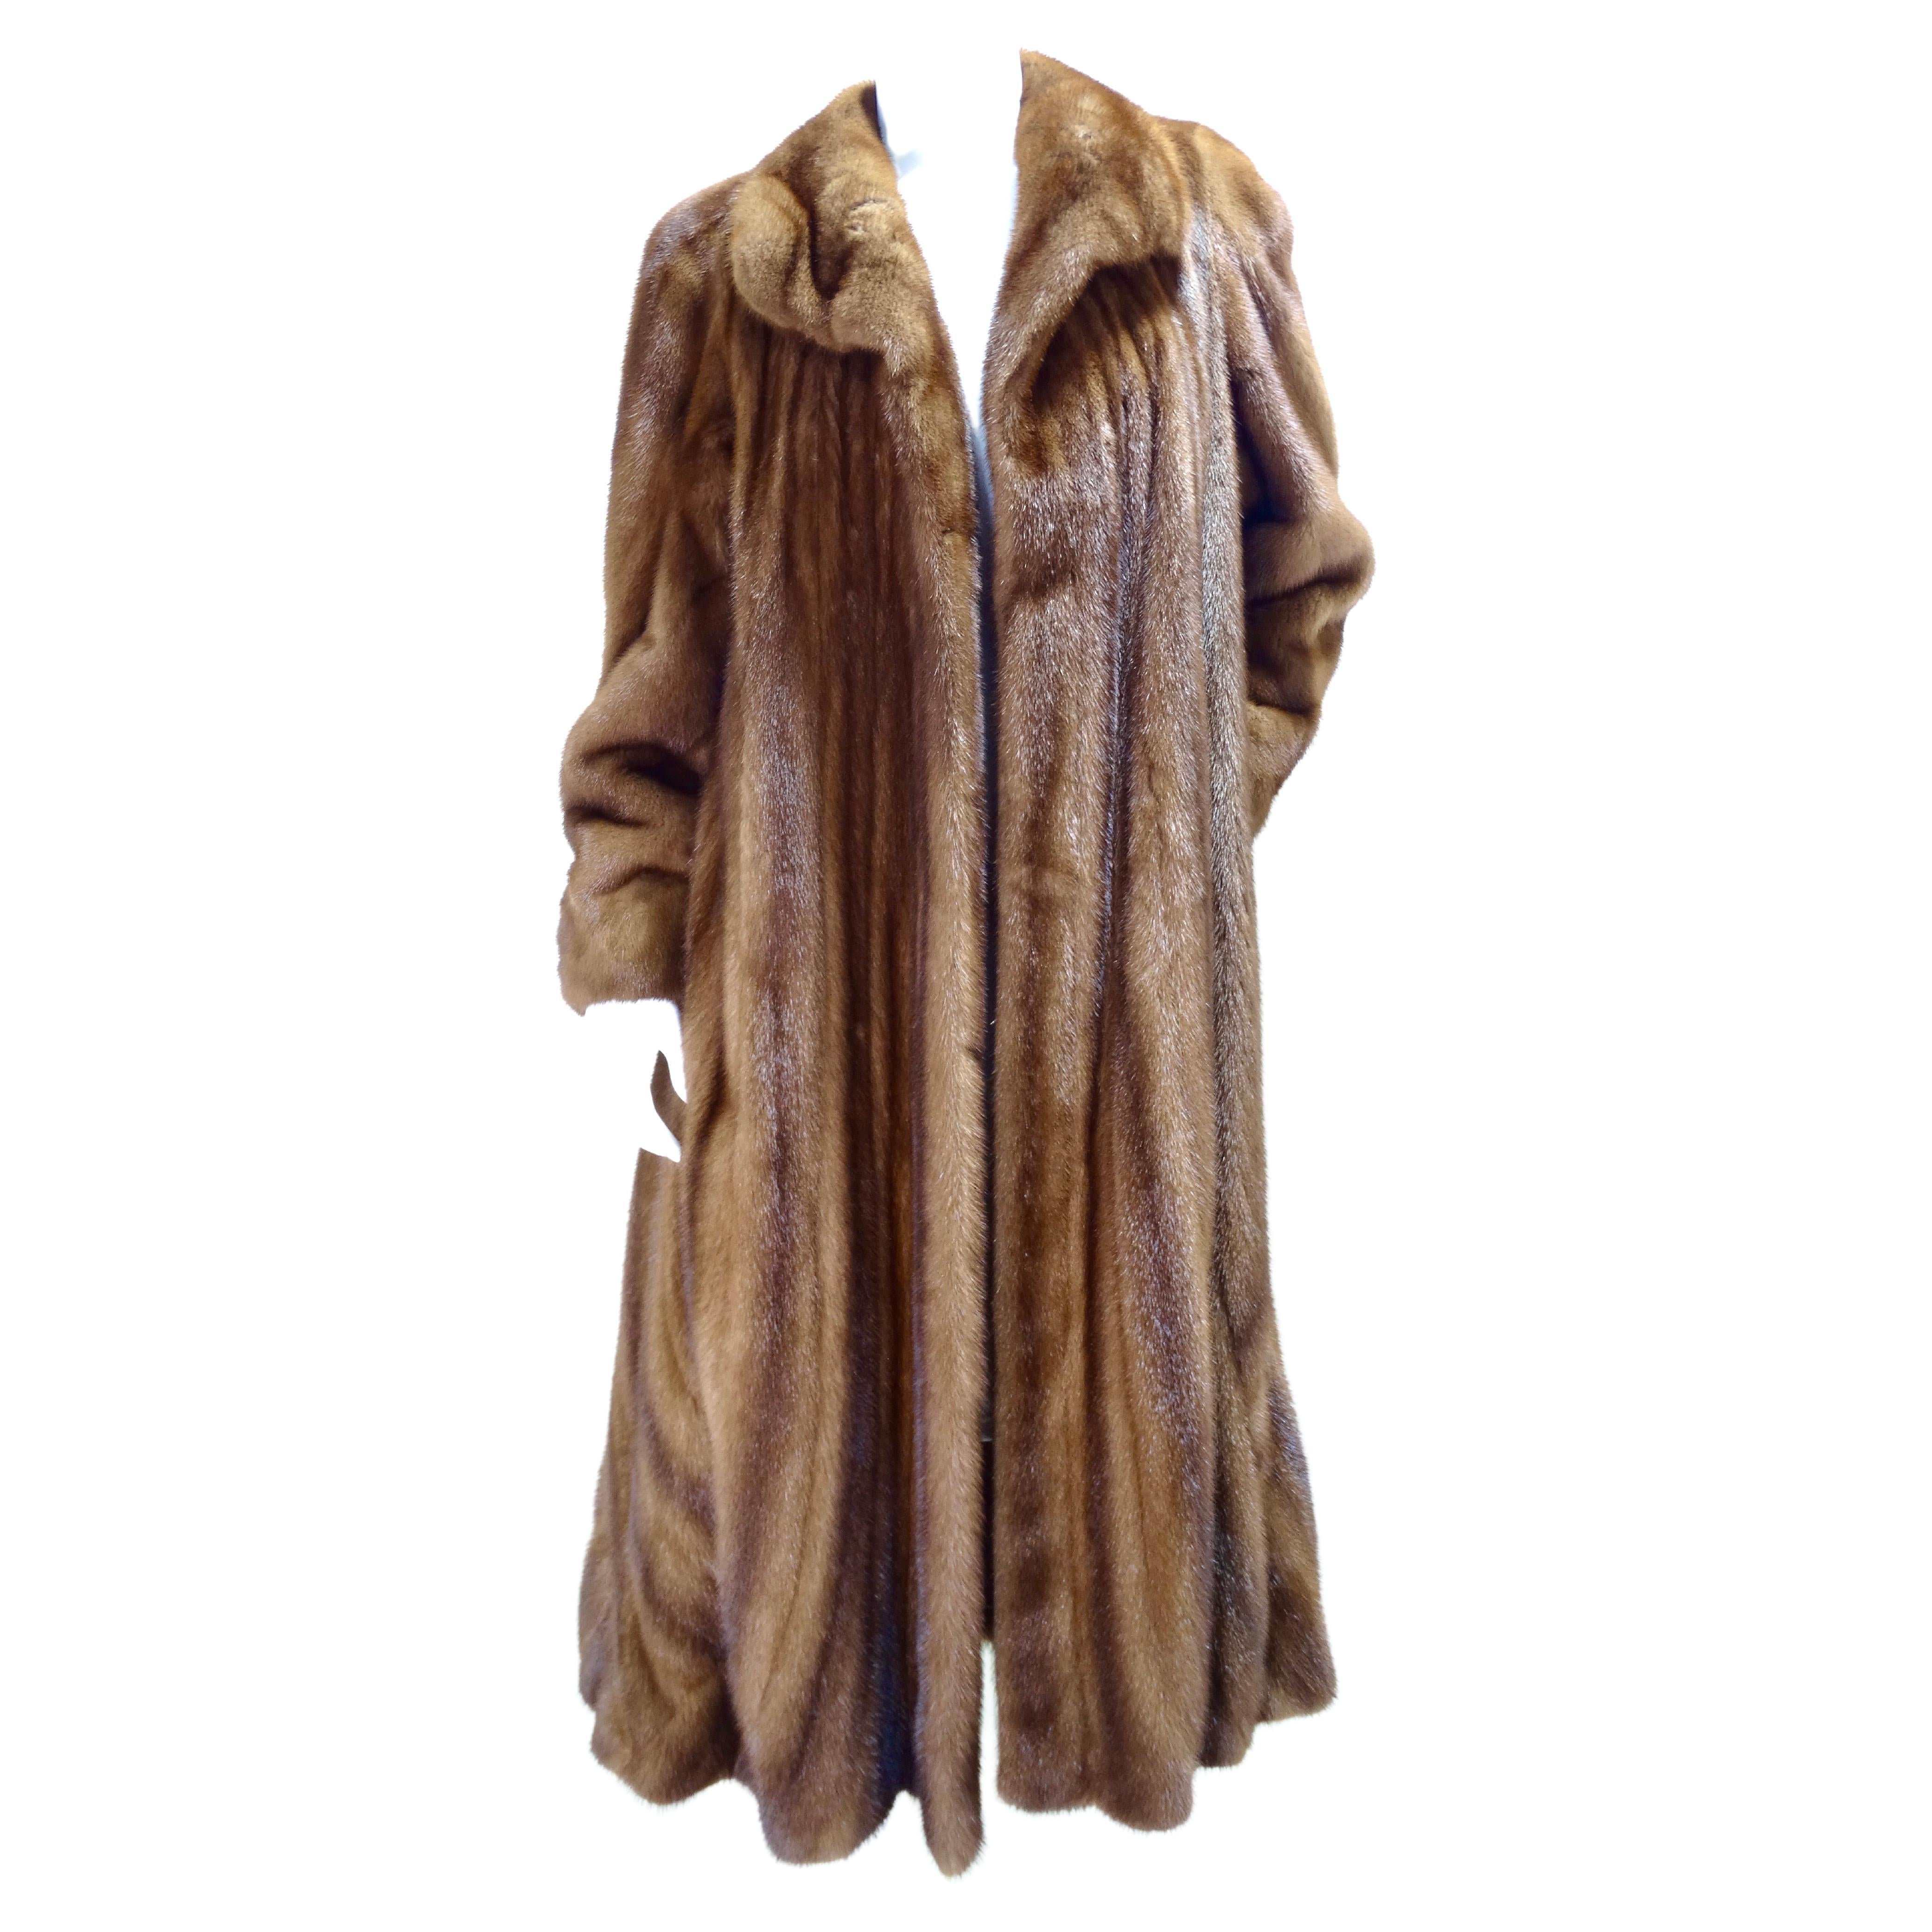 Give it up for the most amazing vintage Zandra Rhodes fur coat! This designer fur will be the perfect addition for winter wardrobe! Check out this striking Natural Demi Buff Mink full length swing coat designed by Zandra Rhodes. This beautiful coat